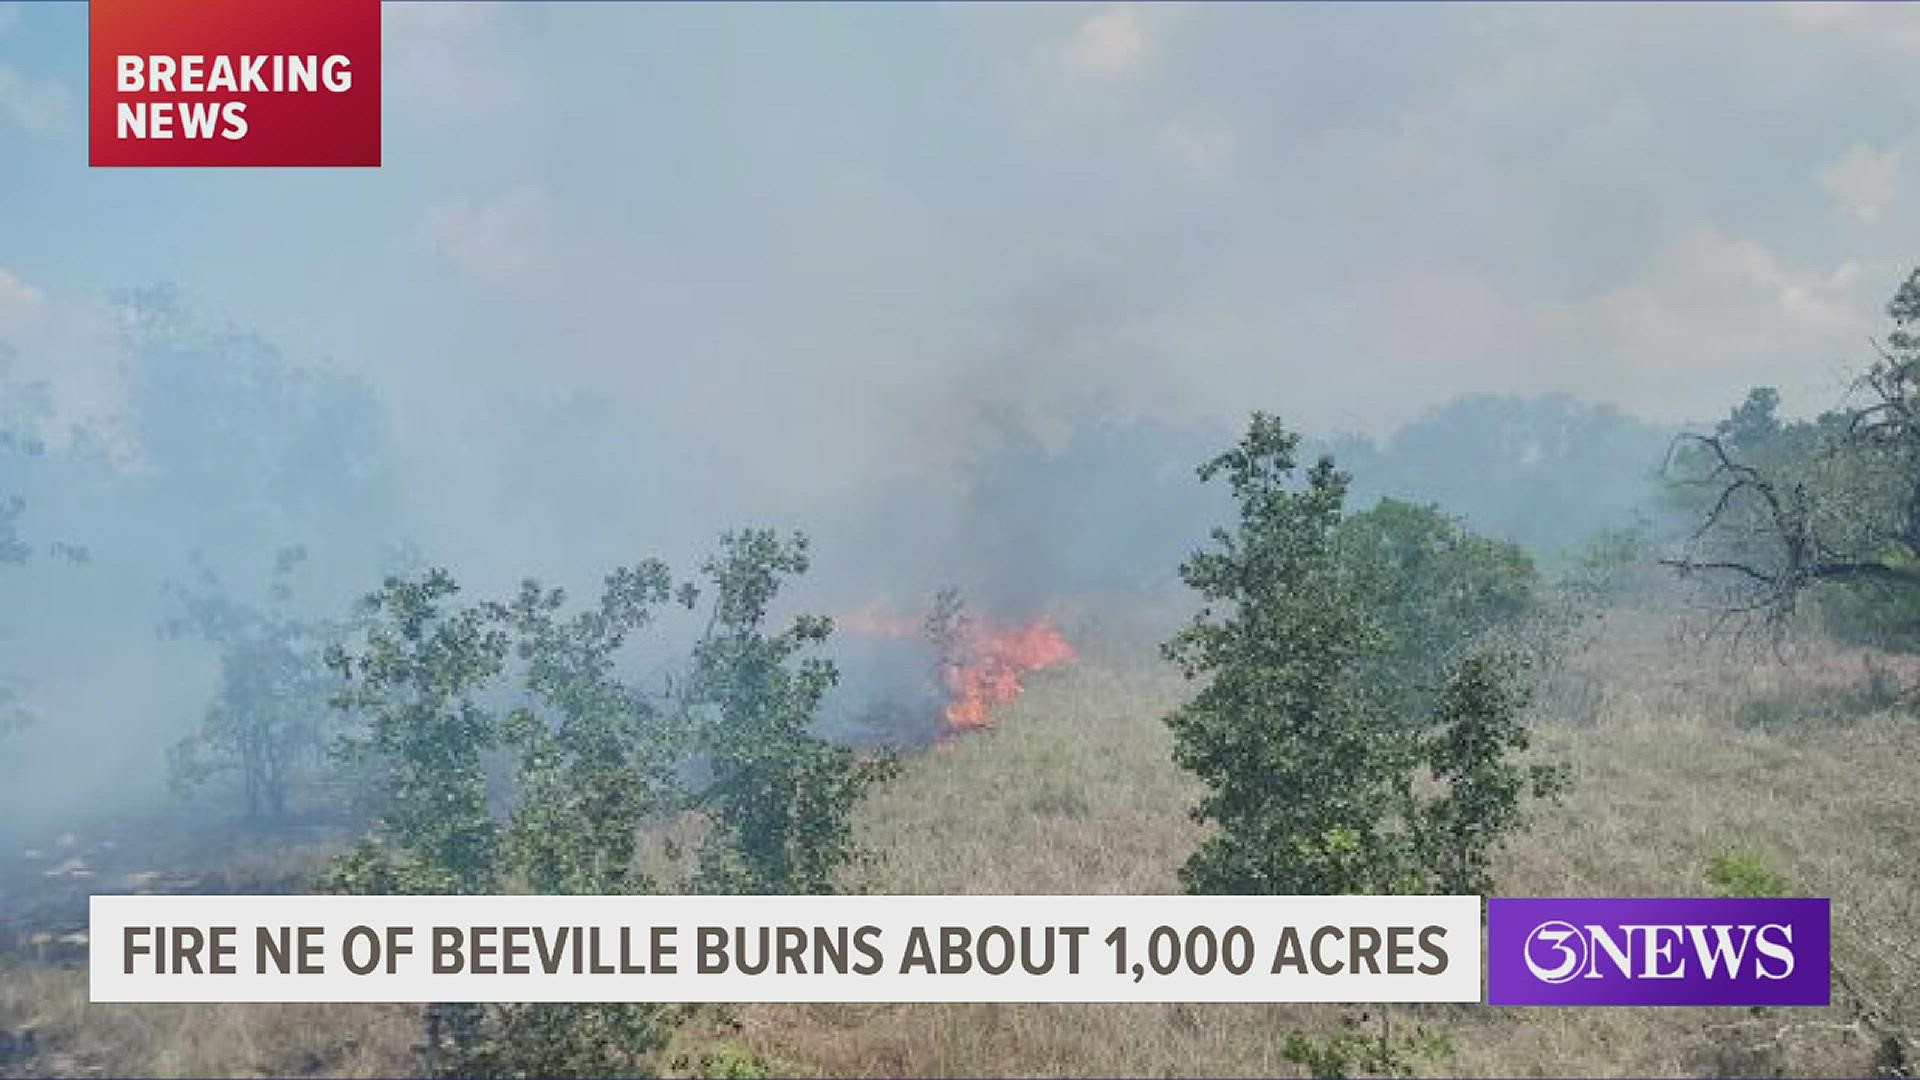 The Texas A&M Forest Service is calling this the Sarco fire, which has burned over a thousand acres so far.